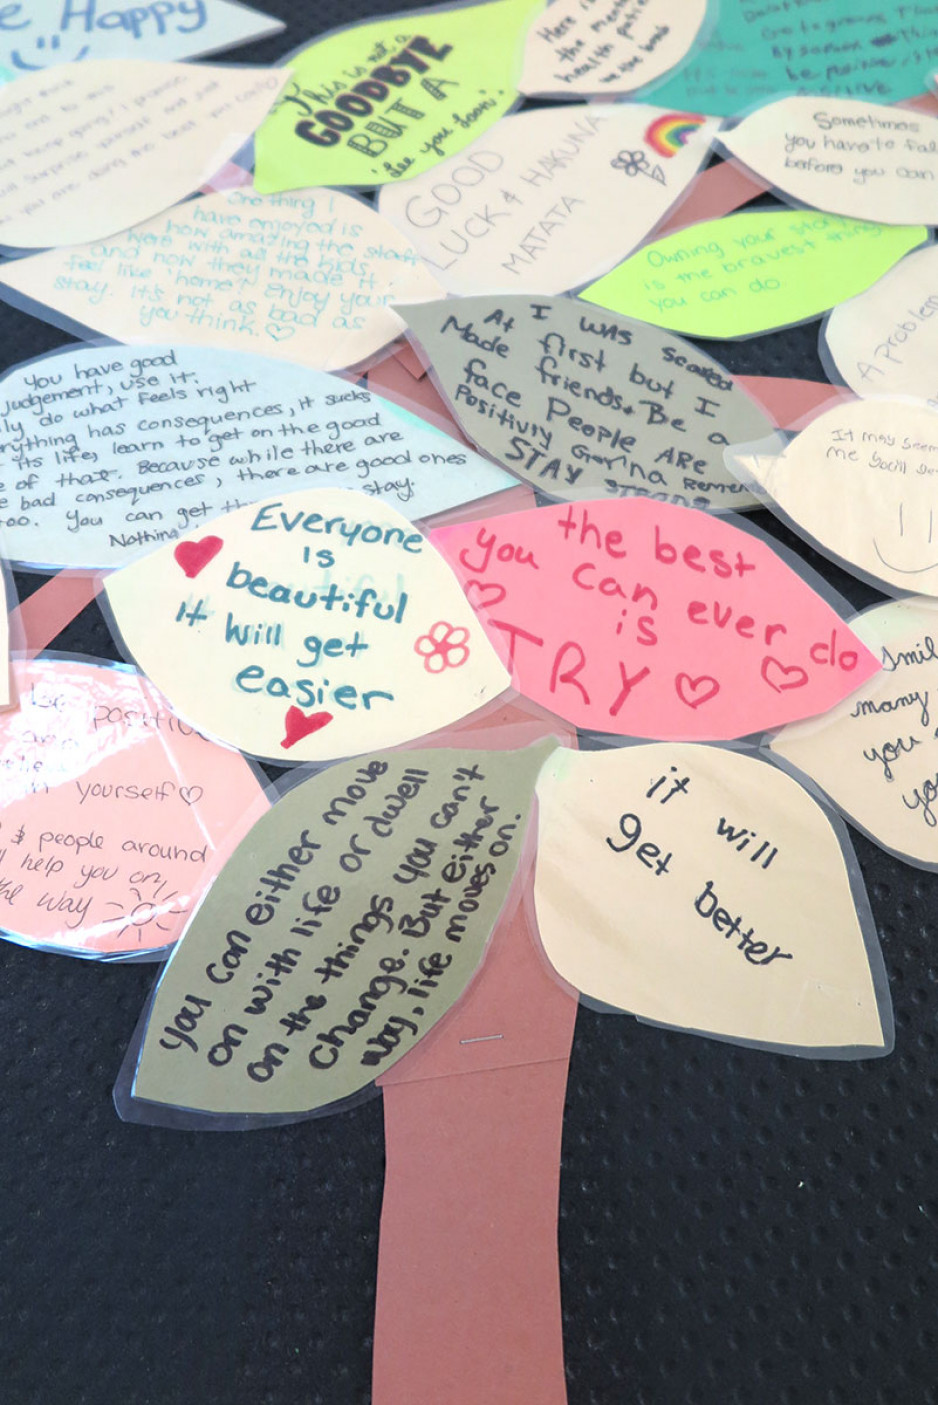 a grouping of leaves with handwritten messages of hope like "It will get better."